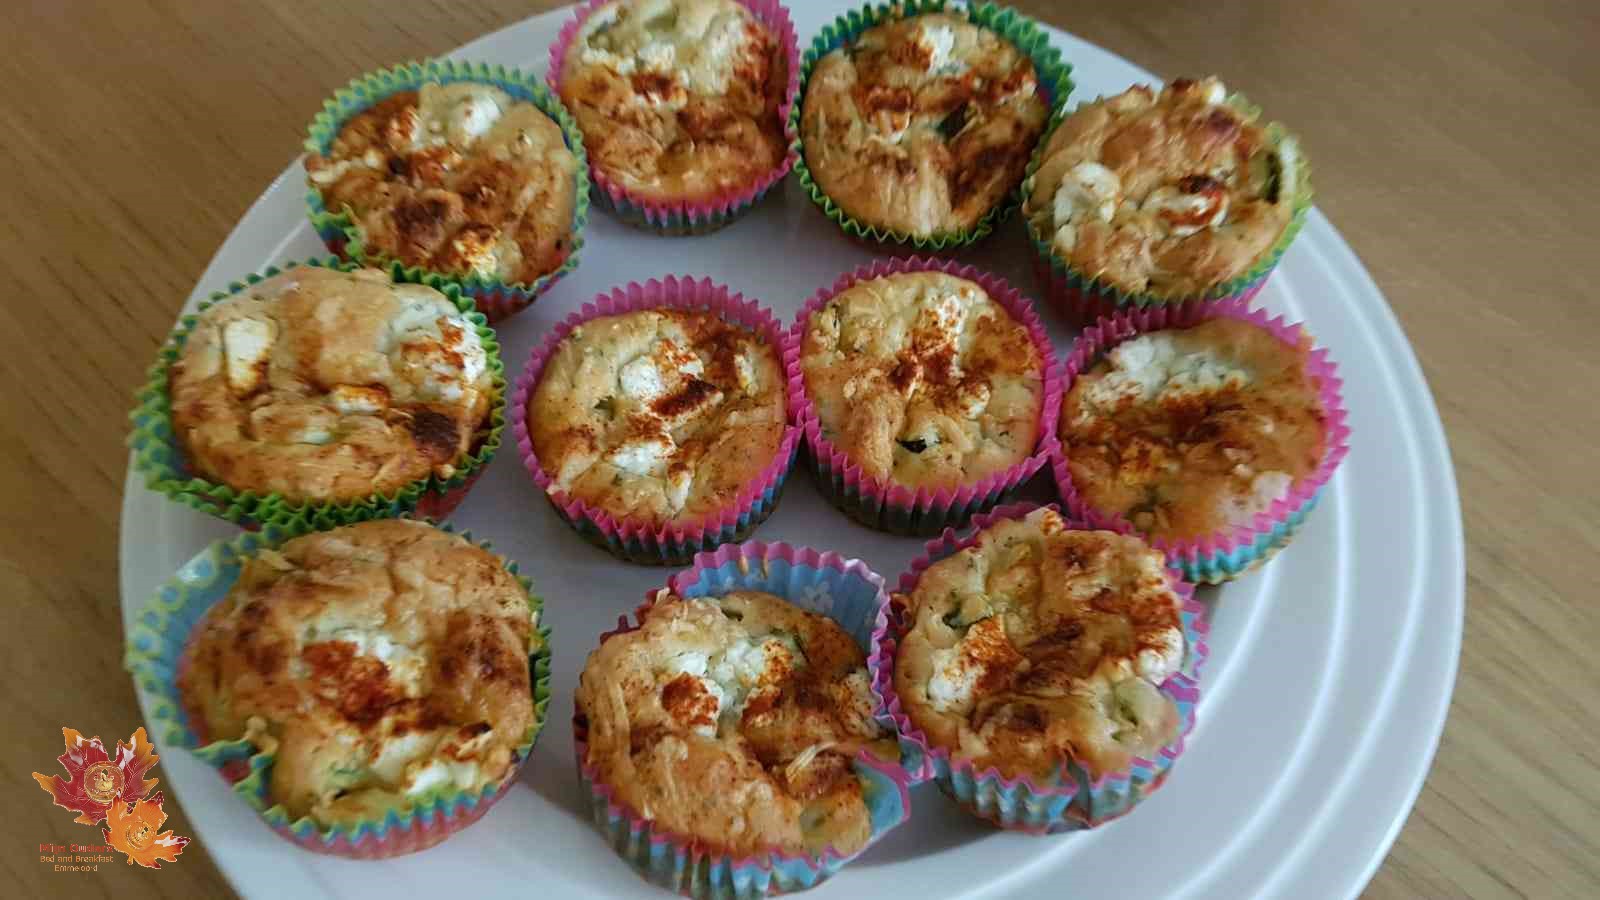 Courgette muffins